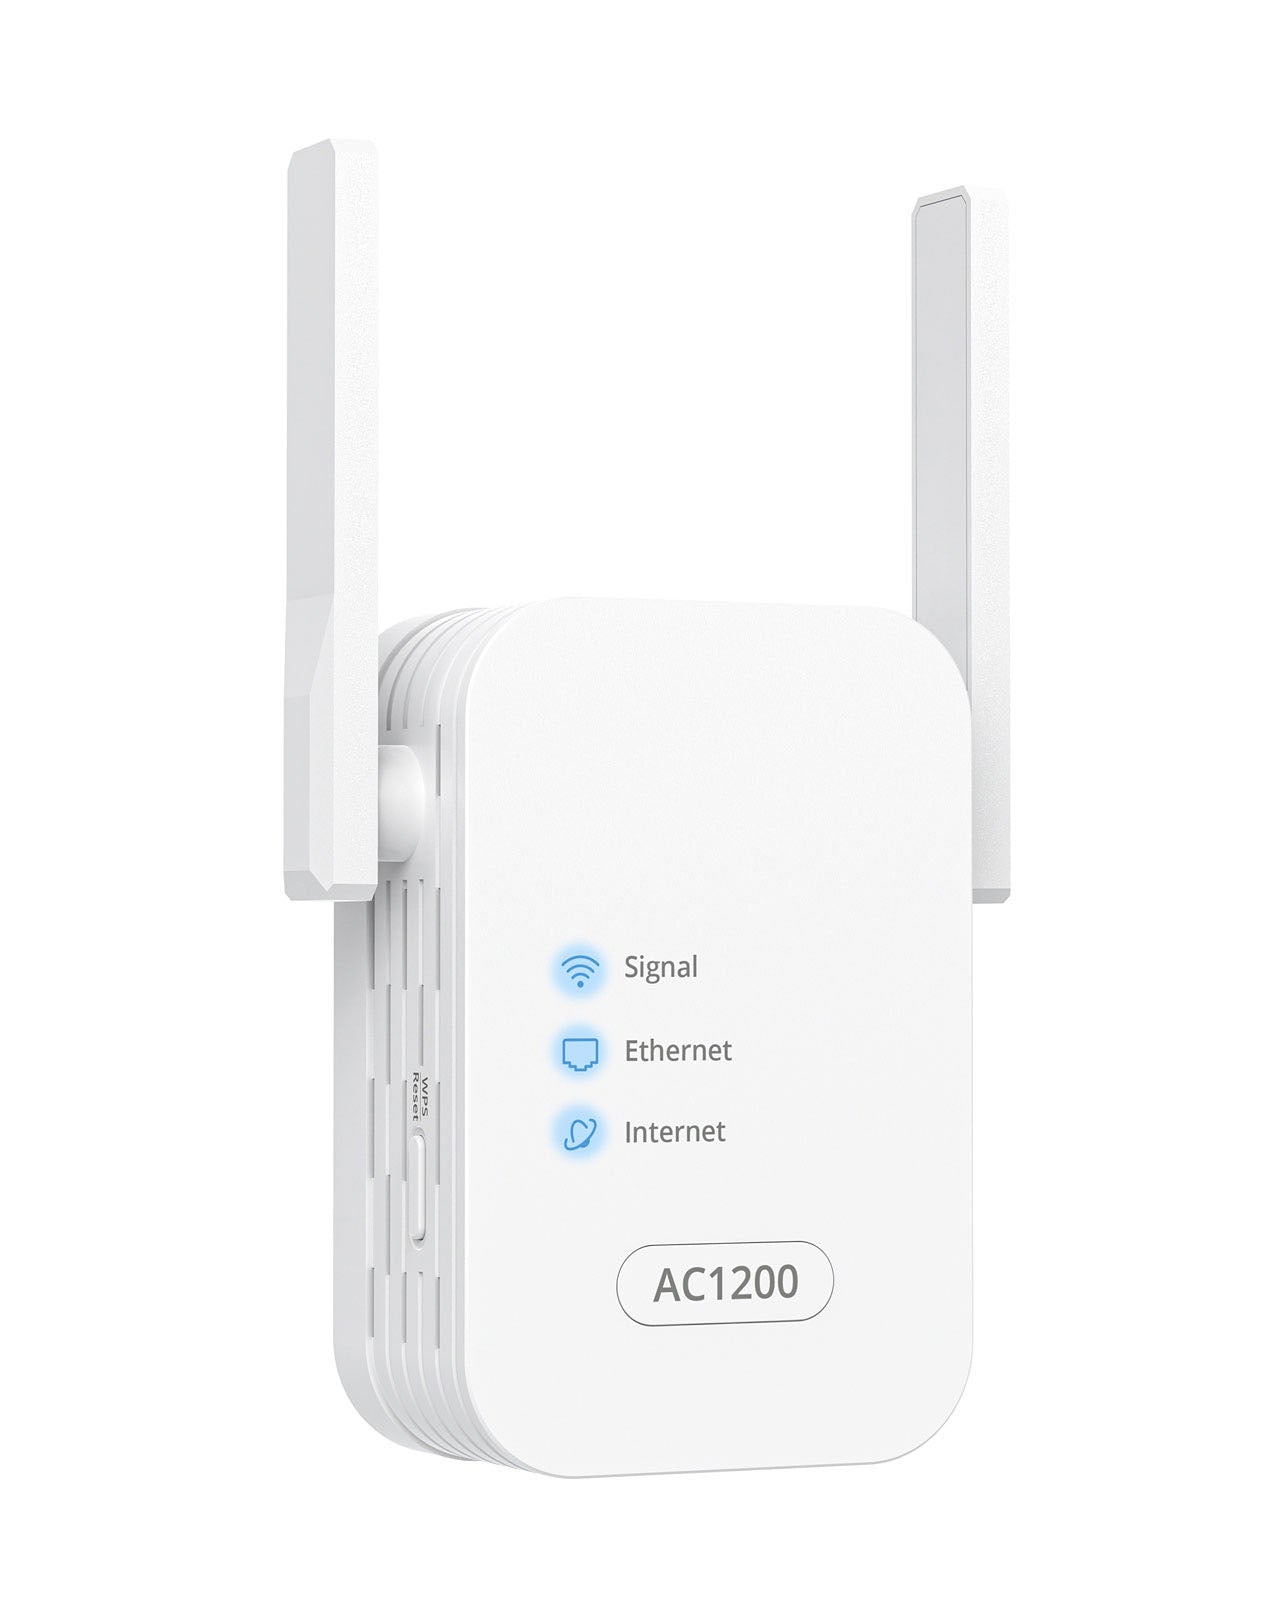 AC1200 WiFi Extender Coverage Up to 1500 sq.ft. and 30 Devices, WiFi Extender Signal Booster for Home Dual Band 5GHz + 2.4GHz, WiFi Booster and Signal Amplifier WPS Easy Setup Internet Booster